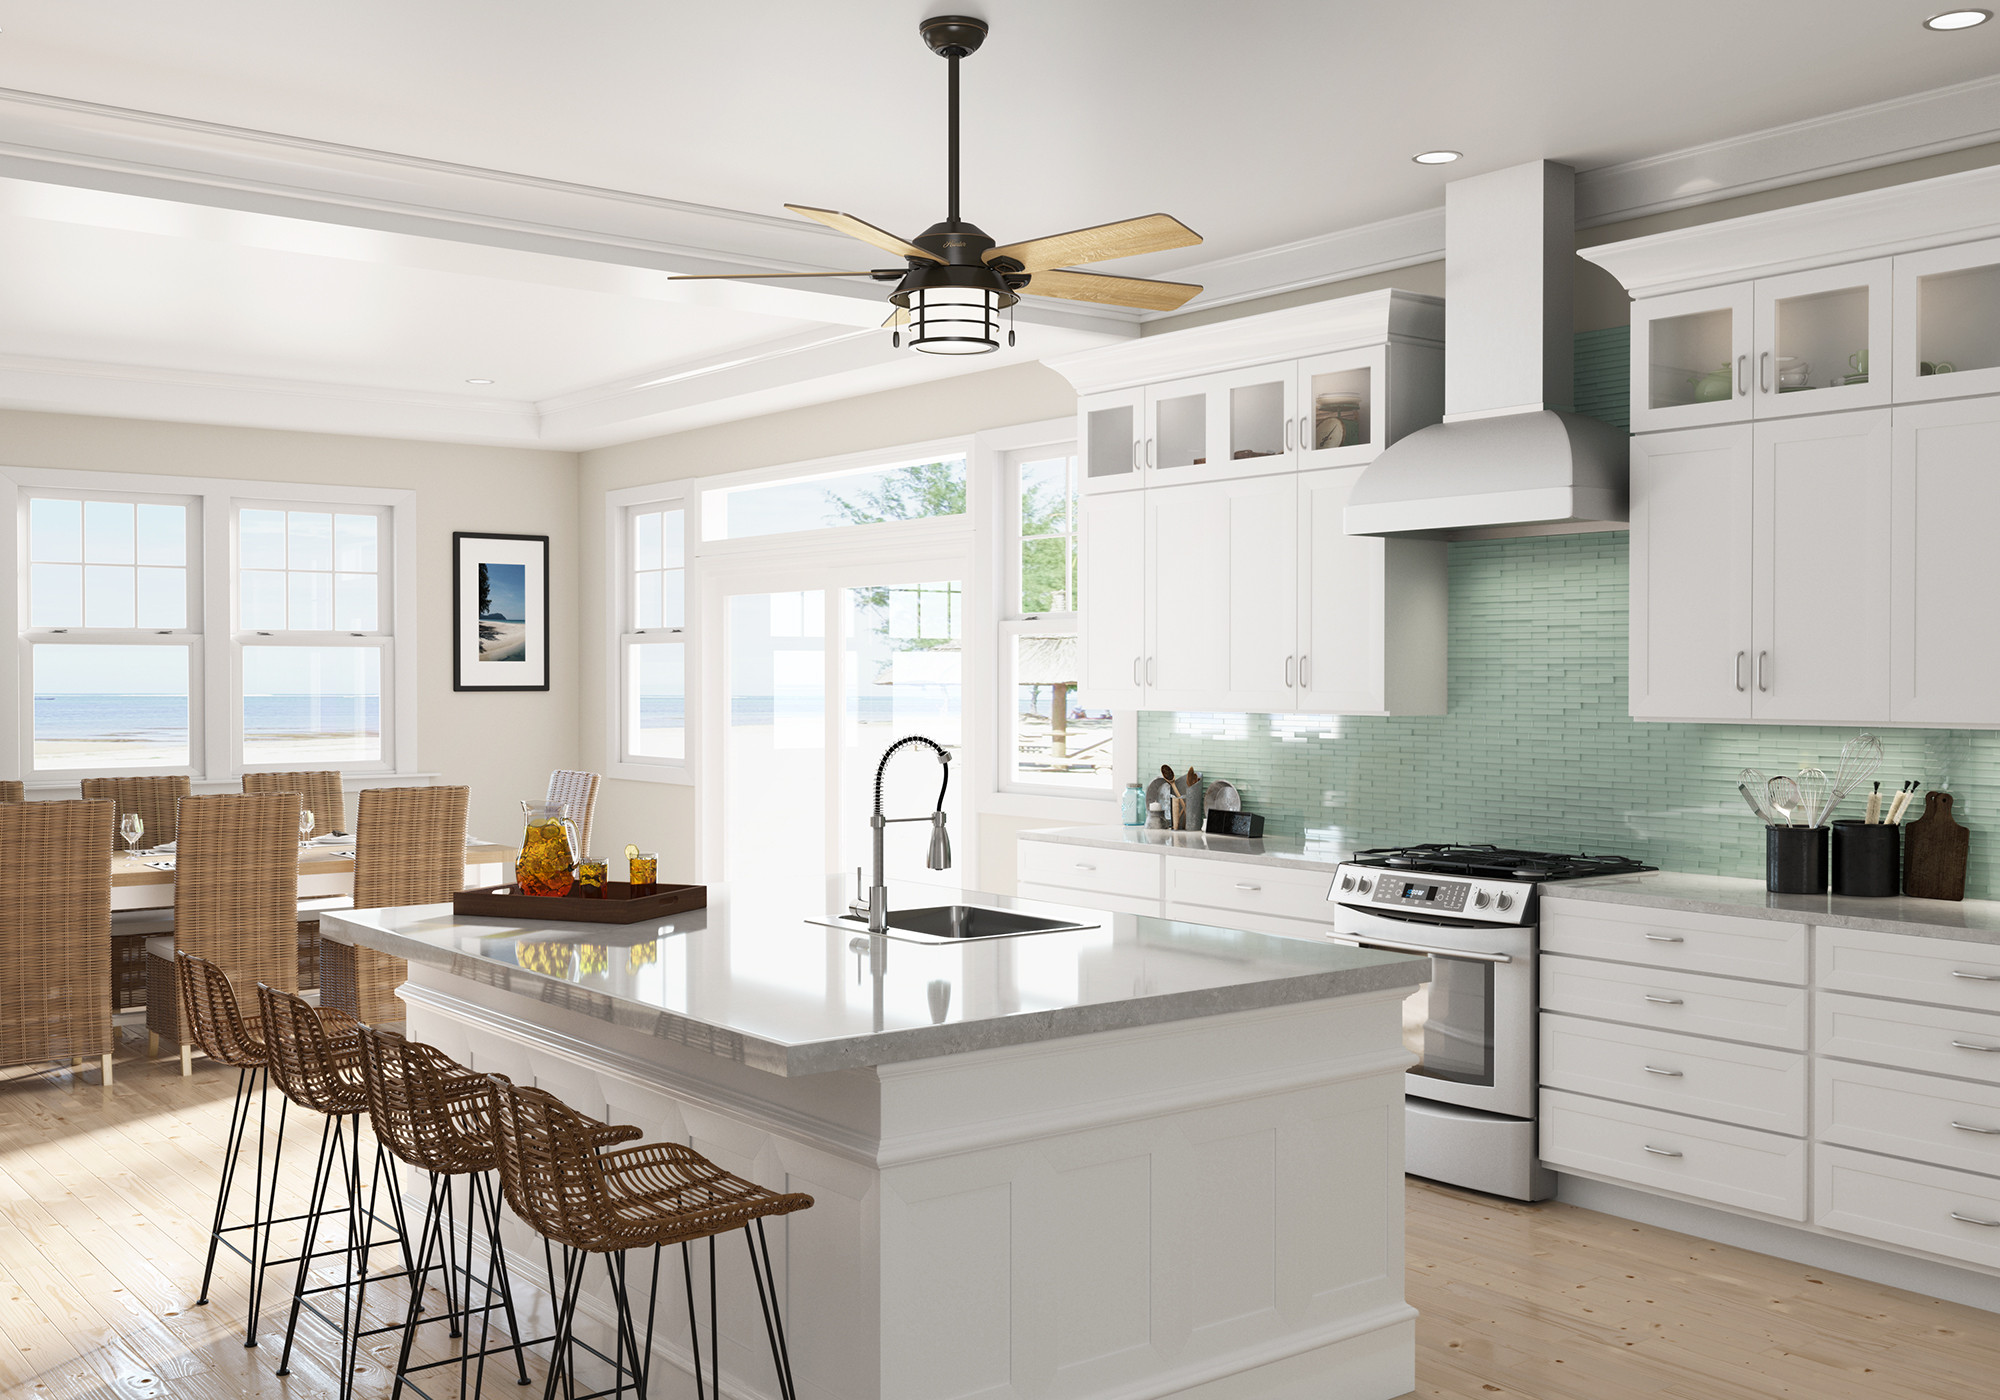 Kitchen Fan With Lights
 Top 5 Things To Consider While Selecting A Range Hood For